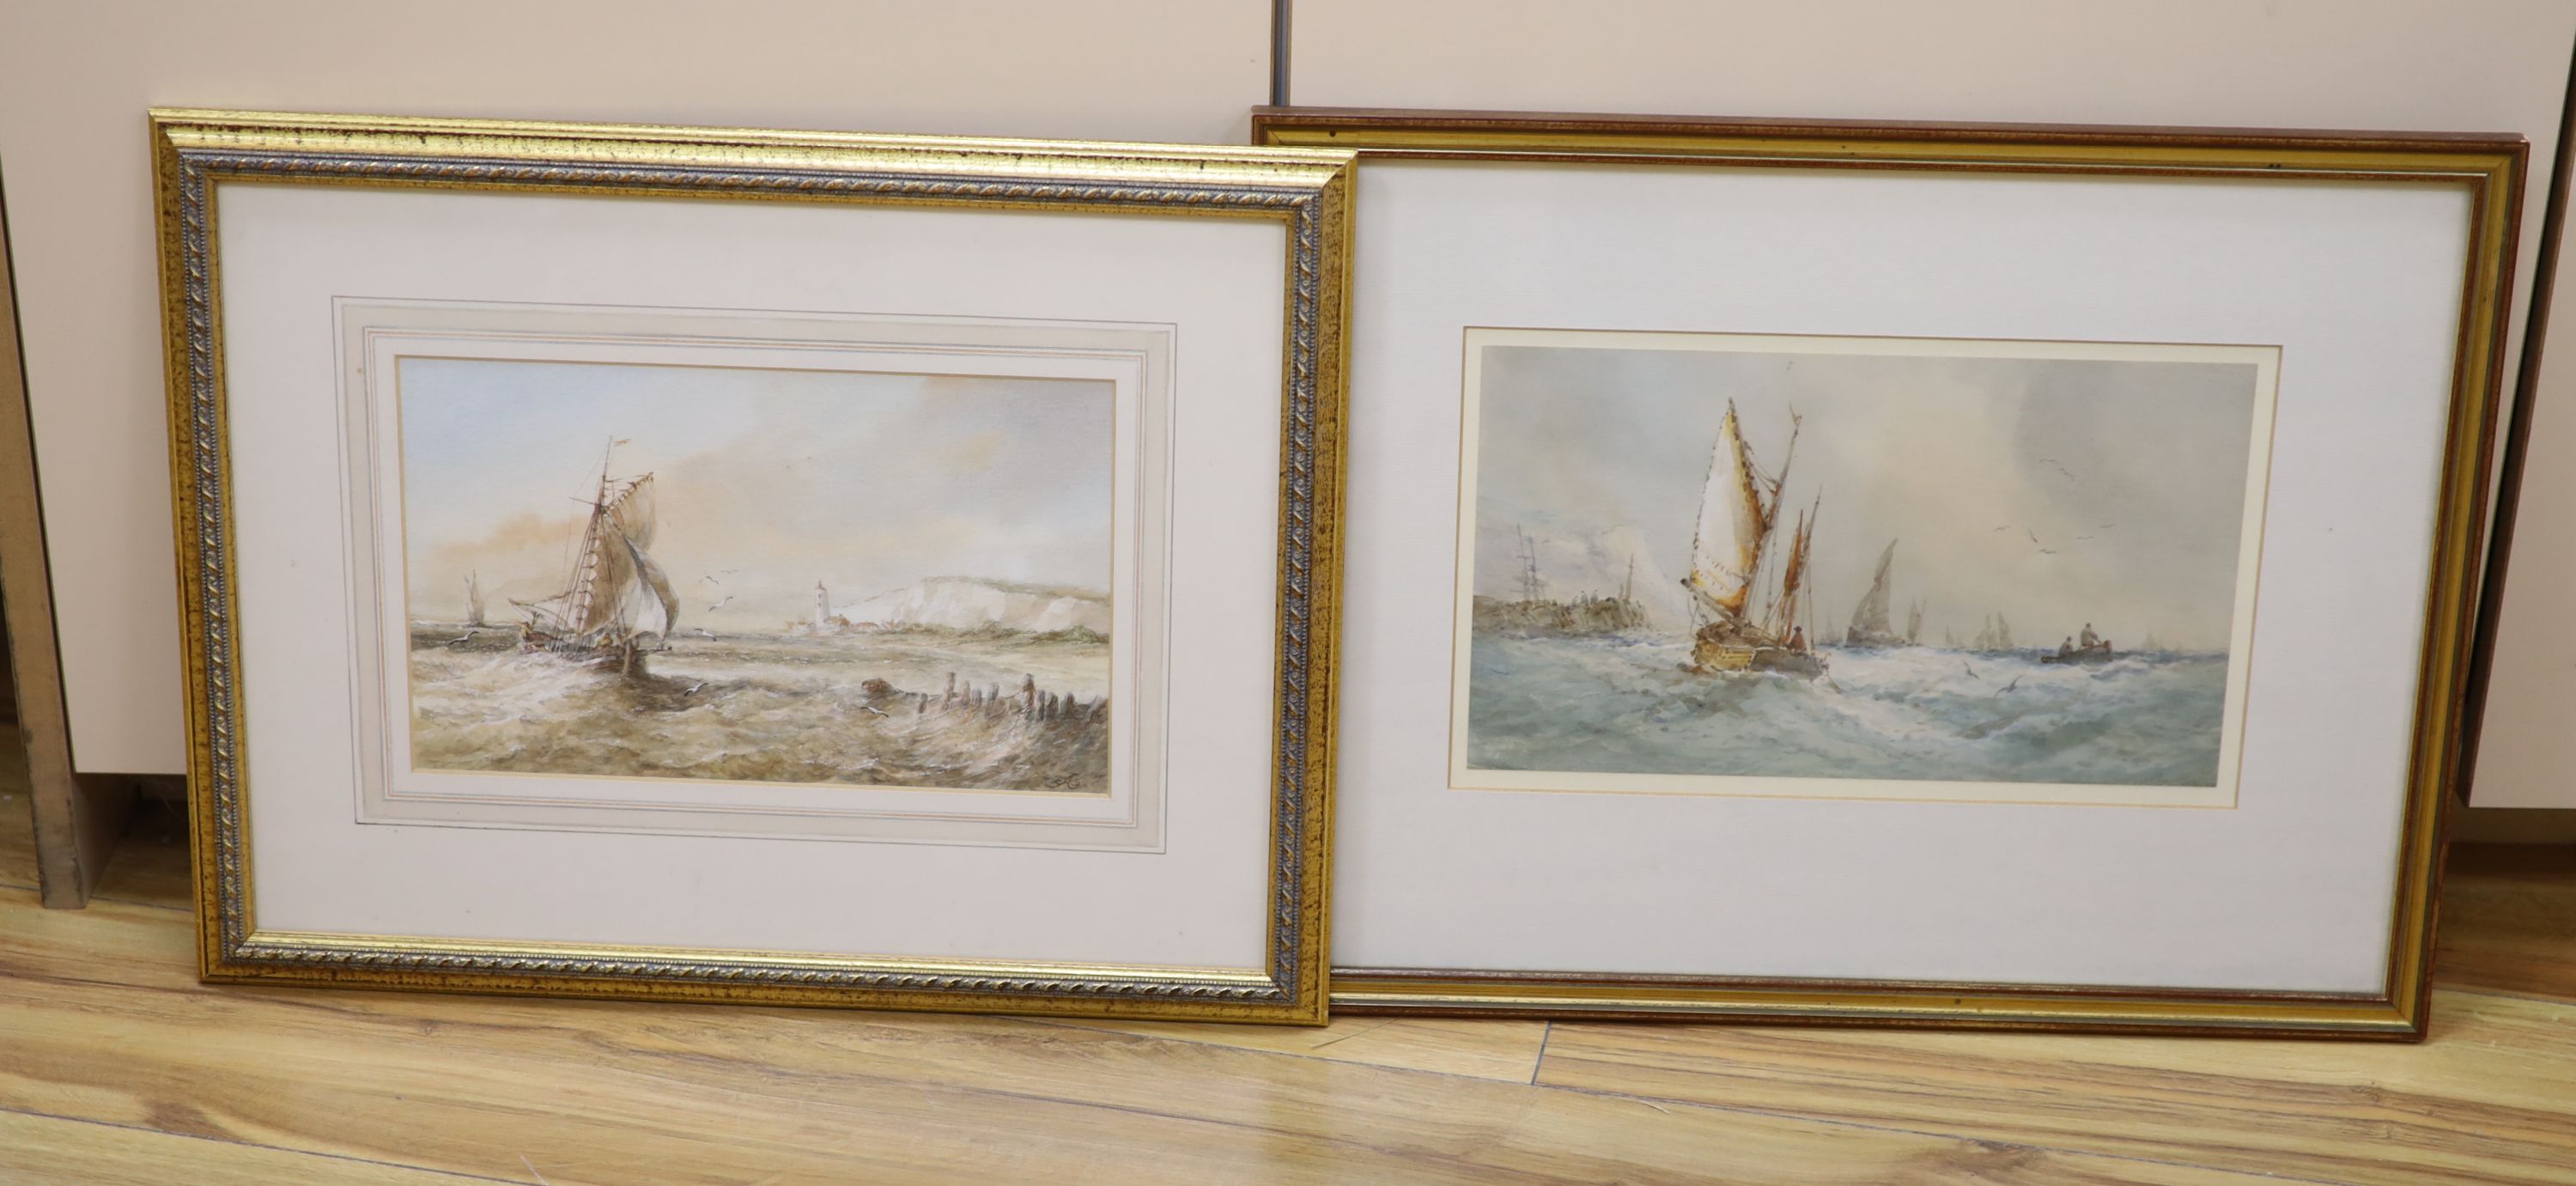 EAS c.1900, watercolour, Fishing boats off the coast, initialled, 17 x 28cm and another similar work